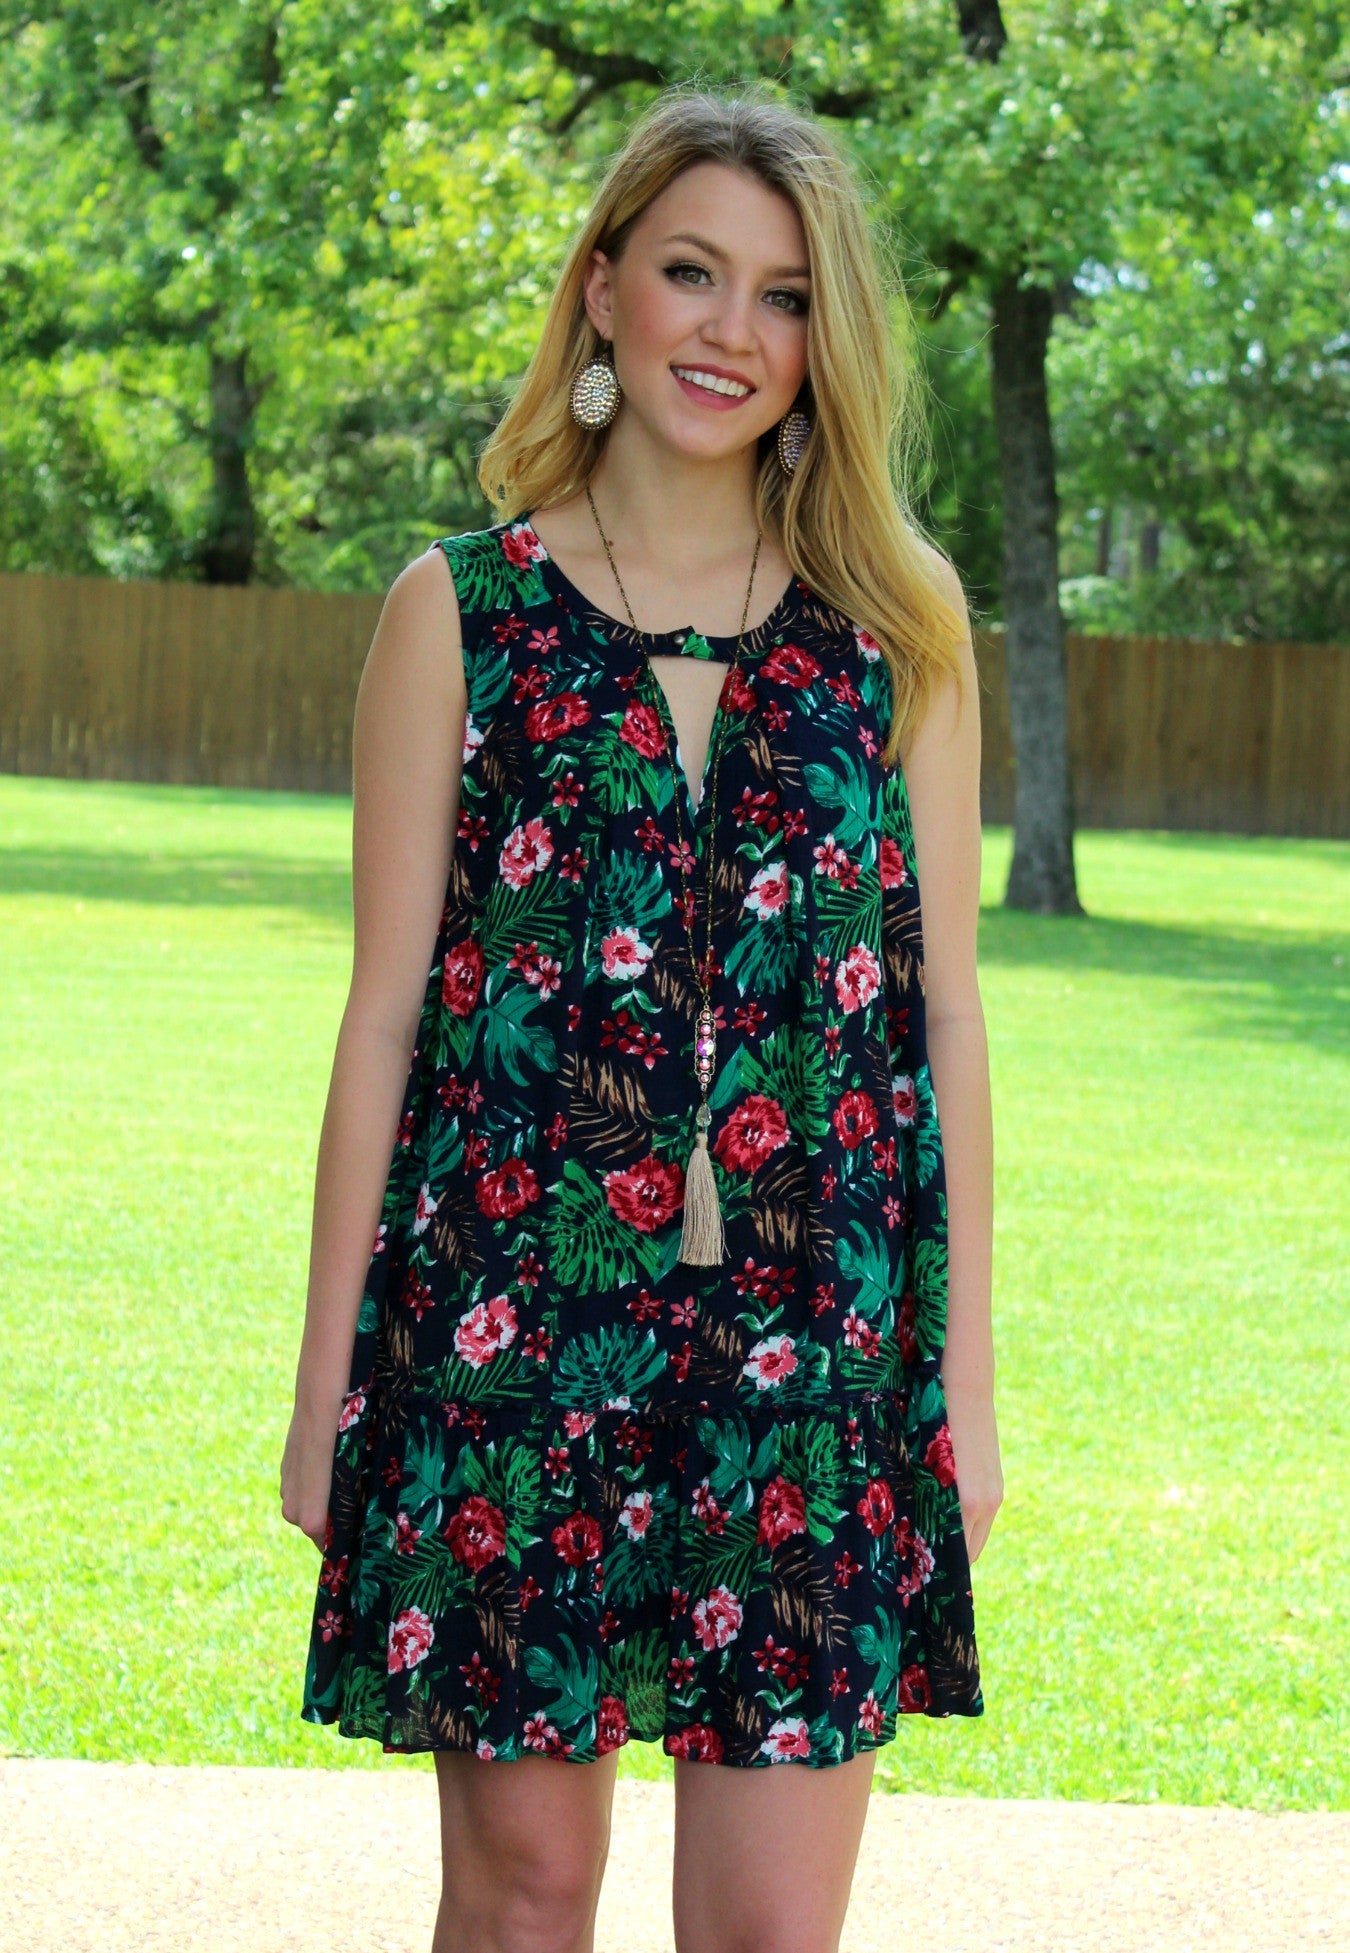 Last Chance Size Small | Whisk Me Away Tropical Floral Trapeze Dress - Giddy Up Glamour Boutique